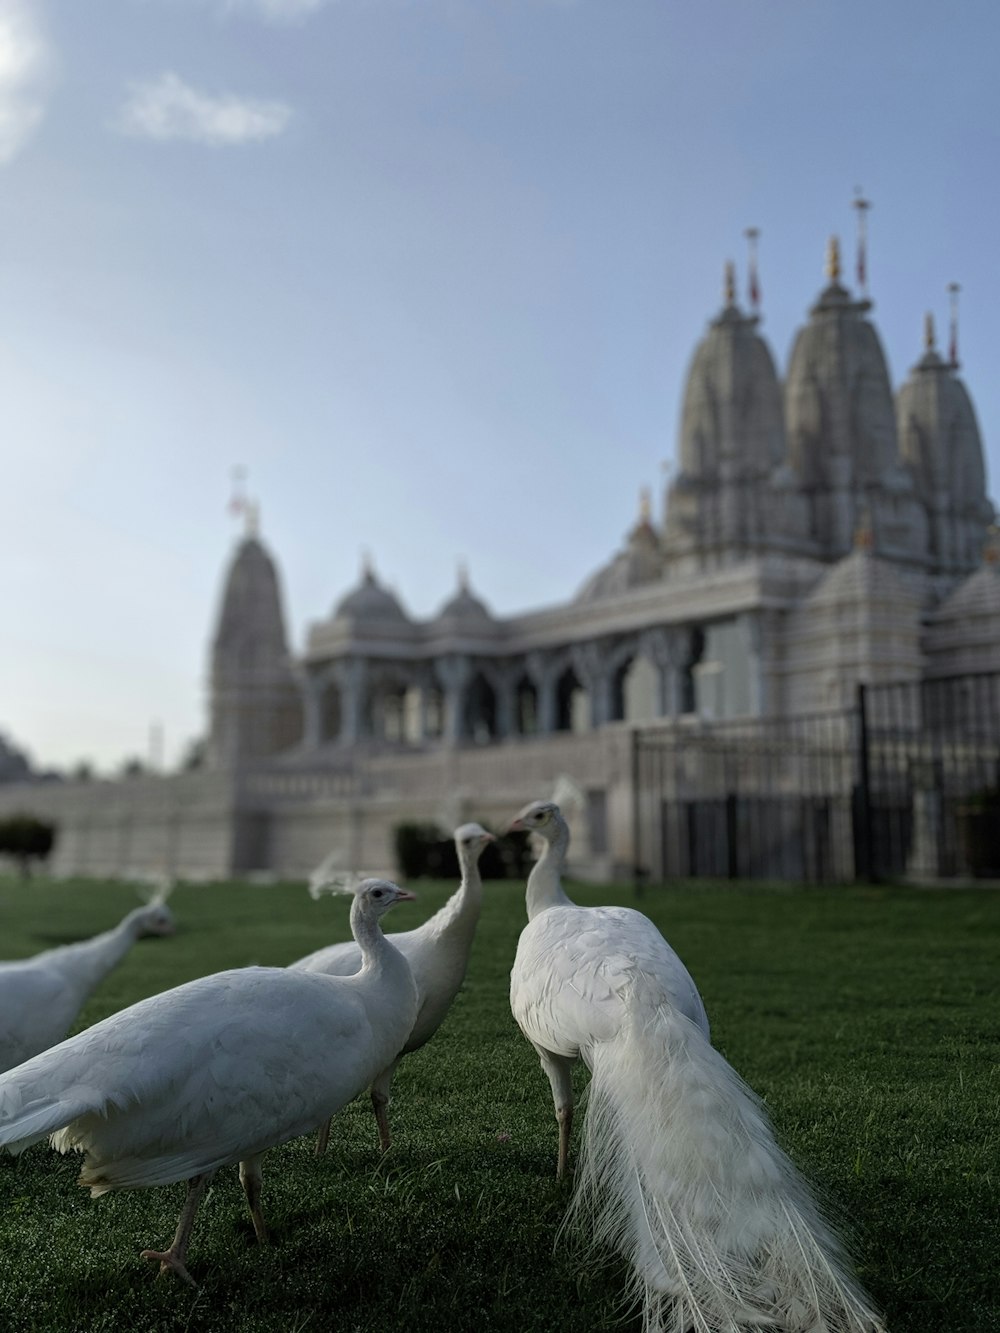 several white peacocks in front of a white concrete building